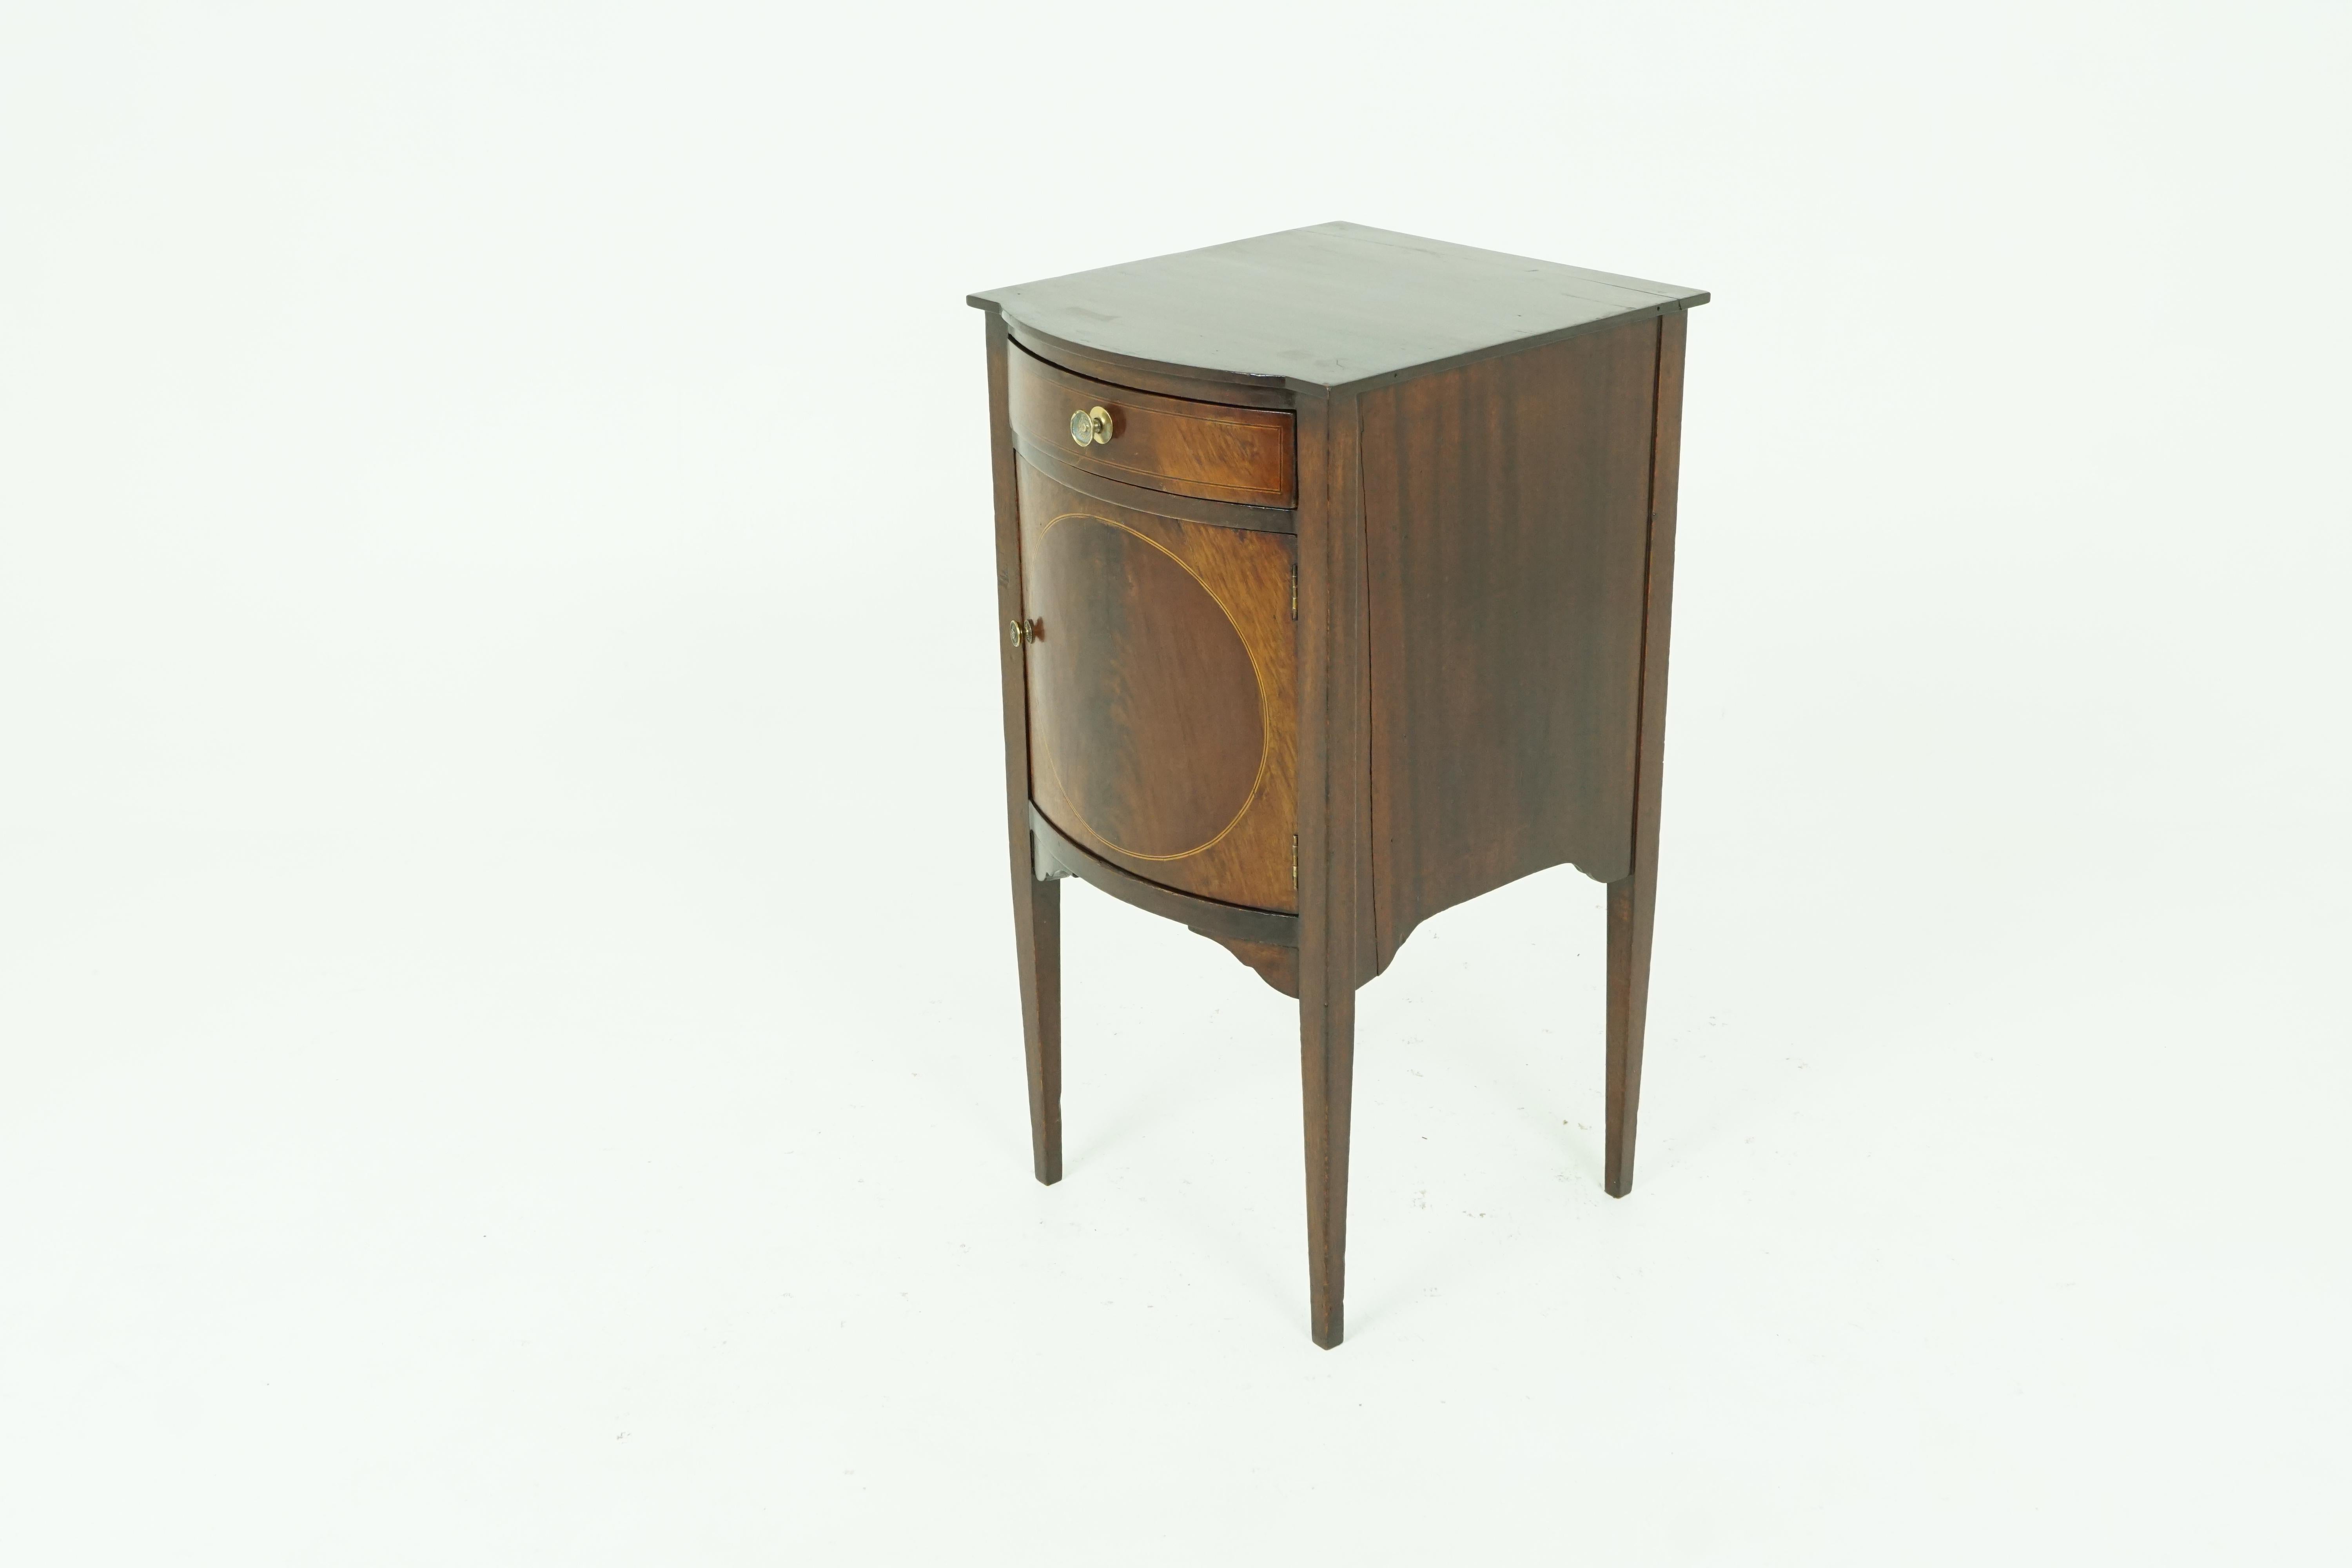 Antique walnut nightstand, Edwardian inlaid lamp table, antique furniture, Scotland, 1910

Scotland 1910
Solid walnut and veneers
Original finish
Serpentine top
Single inlaid drawer below with original brass pull
Underneath a bow front inlaid